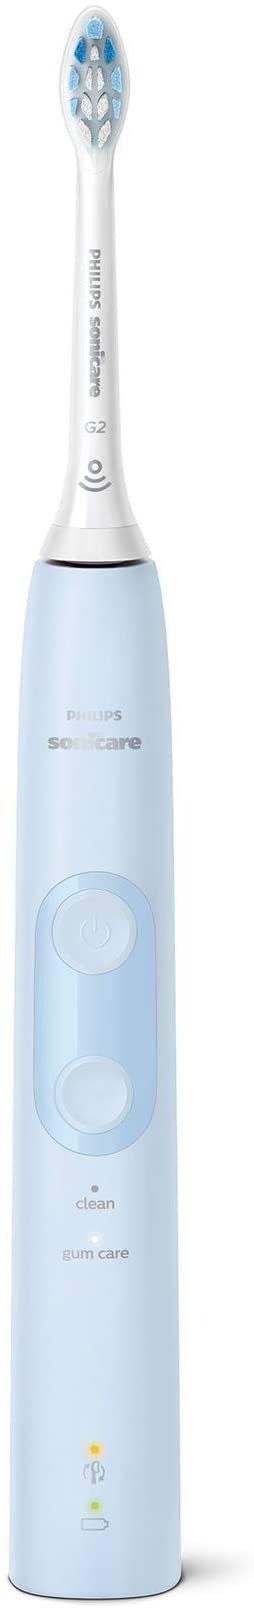 Sonicare ProtectiveClean 4500 电动牙刷